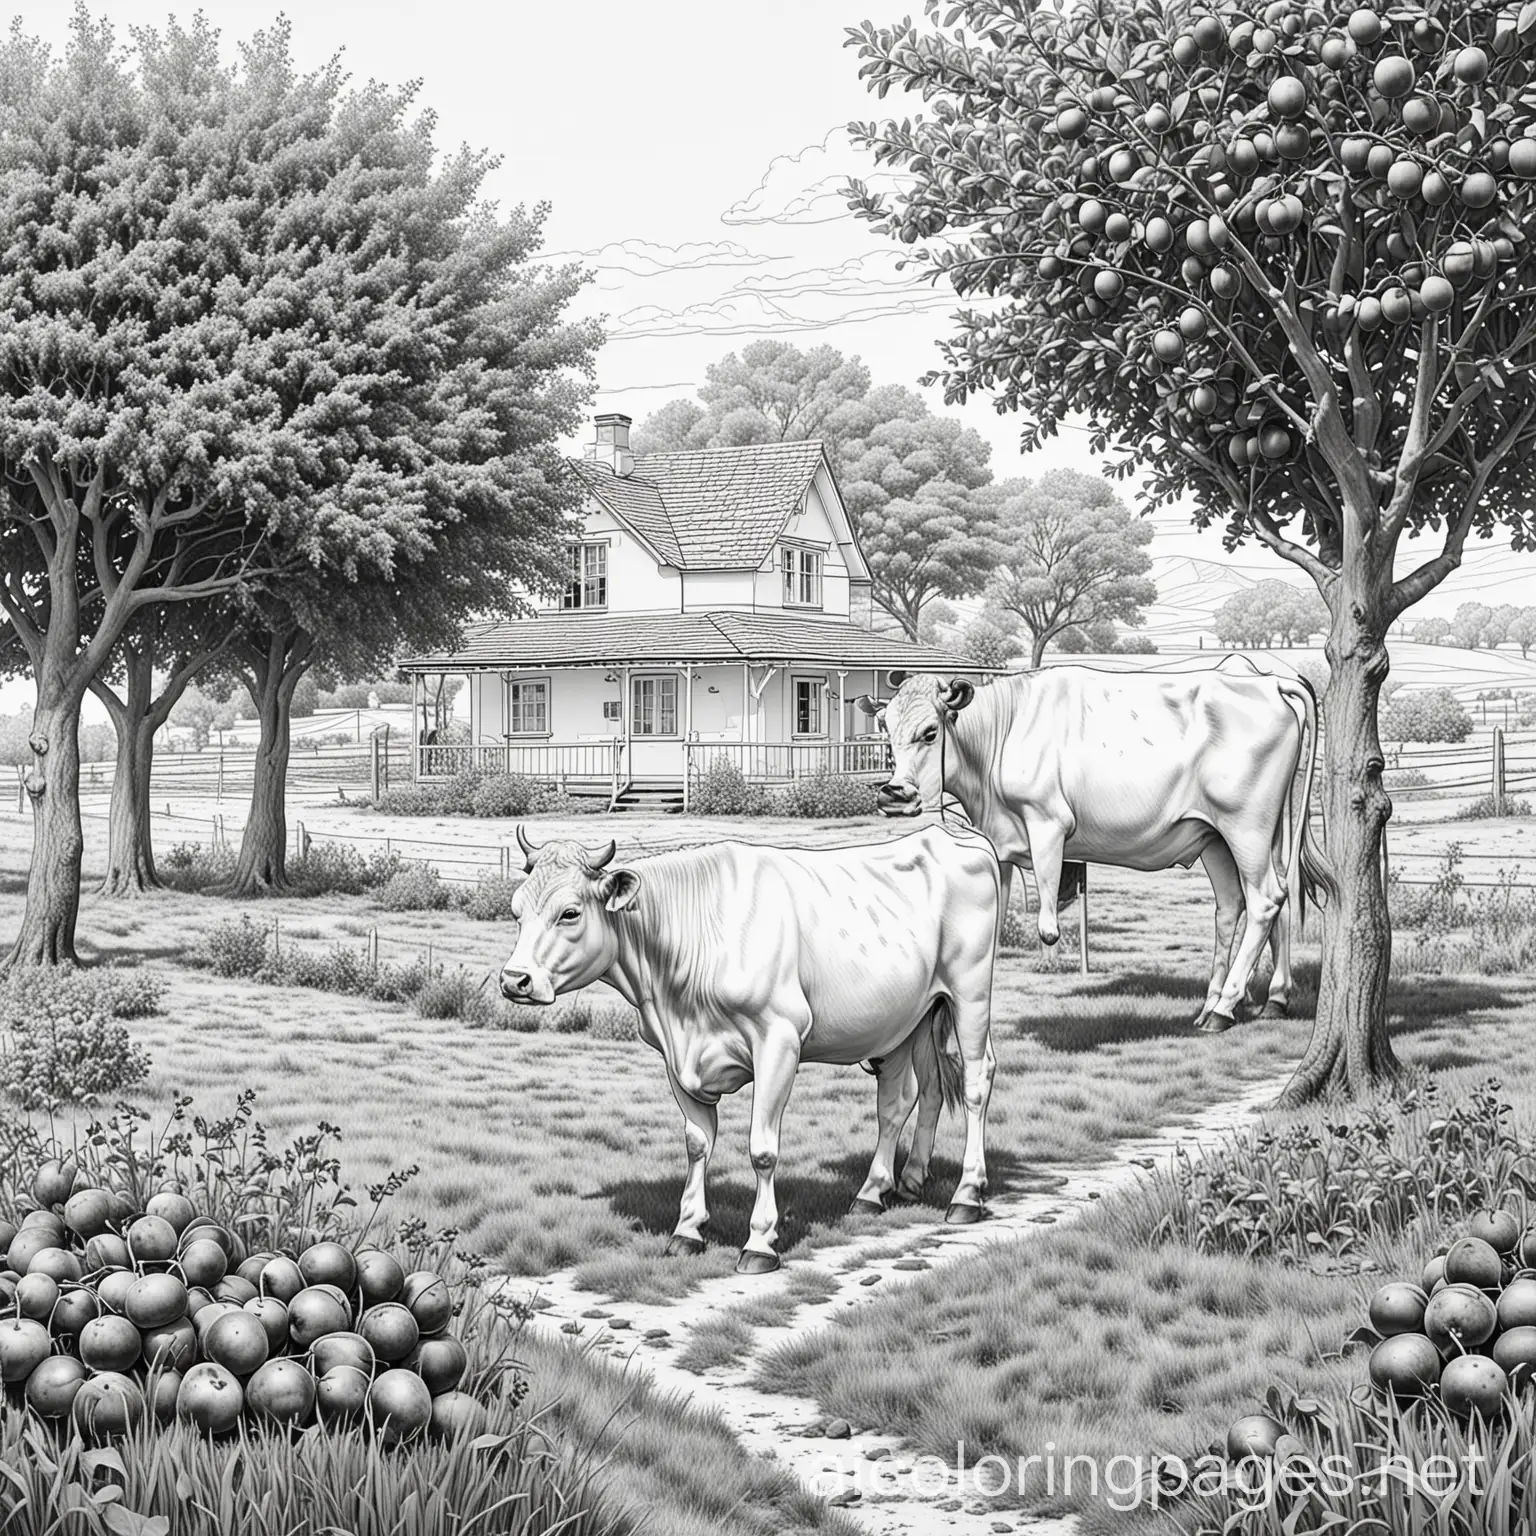 Plum fruits and plum tress, farm house, Cow eating grass, Colouring Page, black and white, line art, white background, Simplicity, Ample White Space. The background of the colouring page is plain white to make it easy for young children to colour within the lines. The outlines of all the subjects are easy to distinguish, making it simple for kids to colour without too much difficulty.